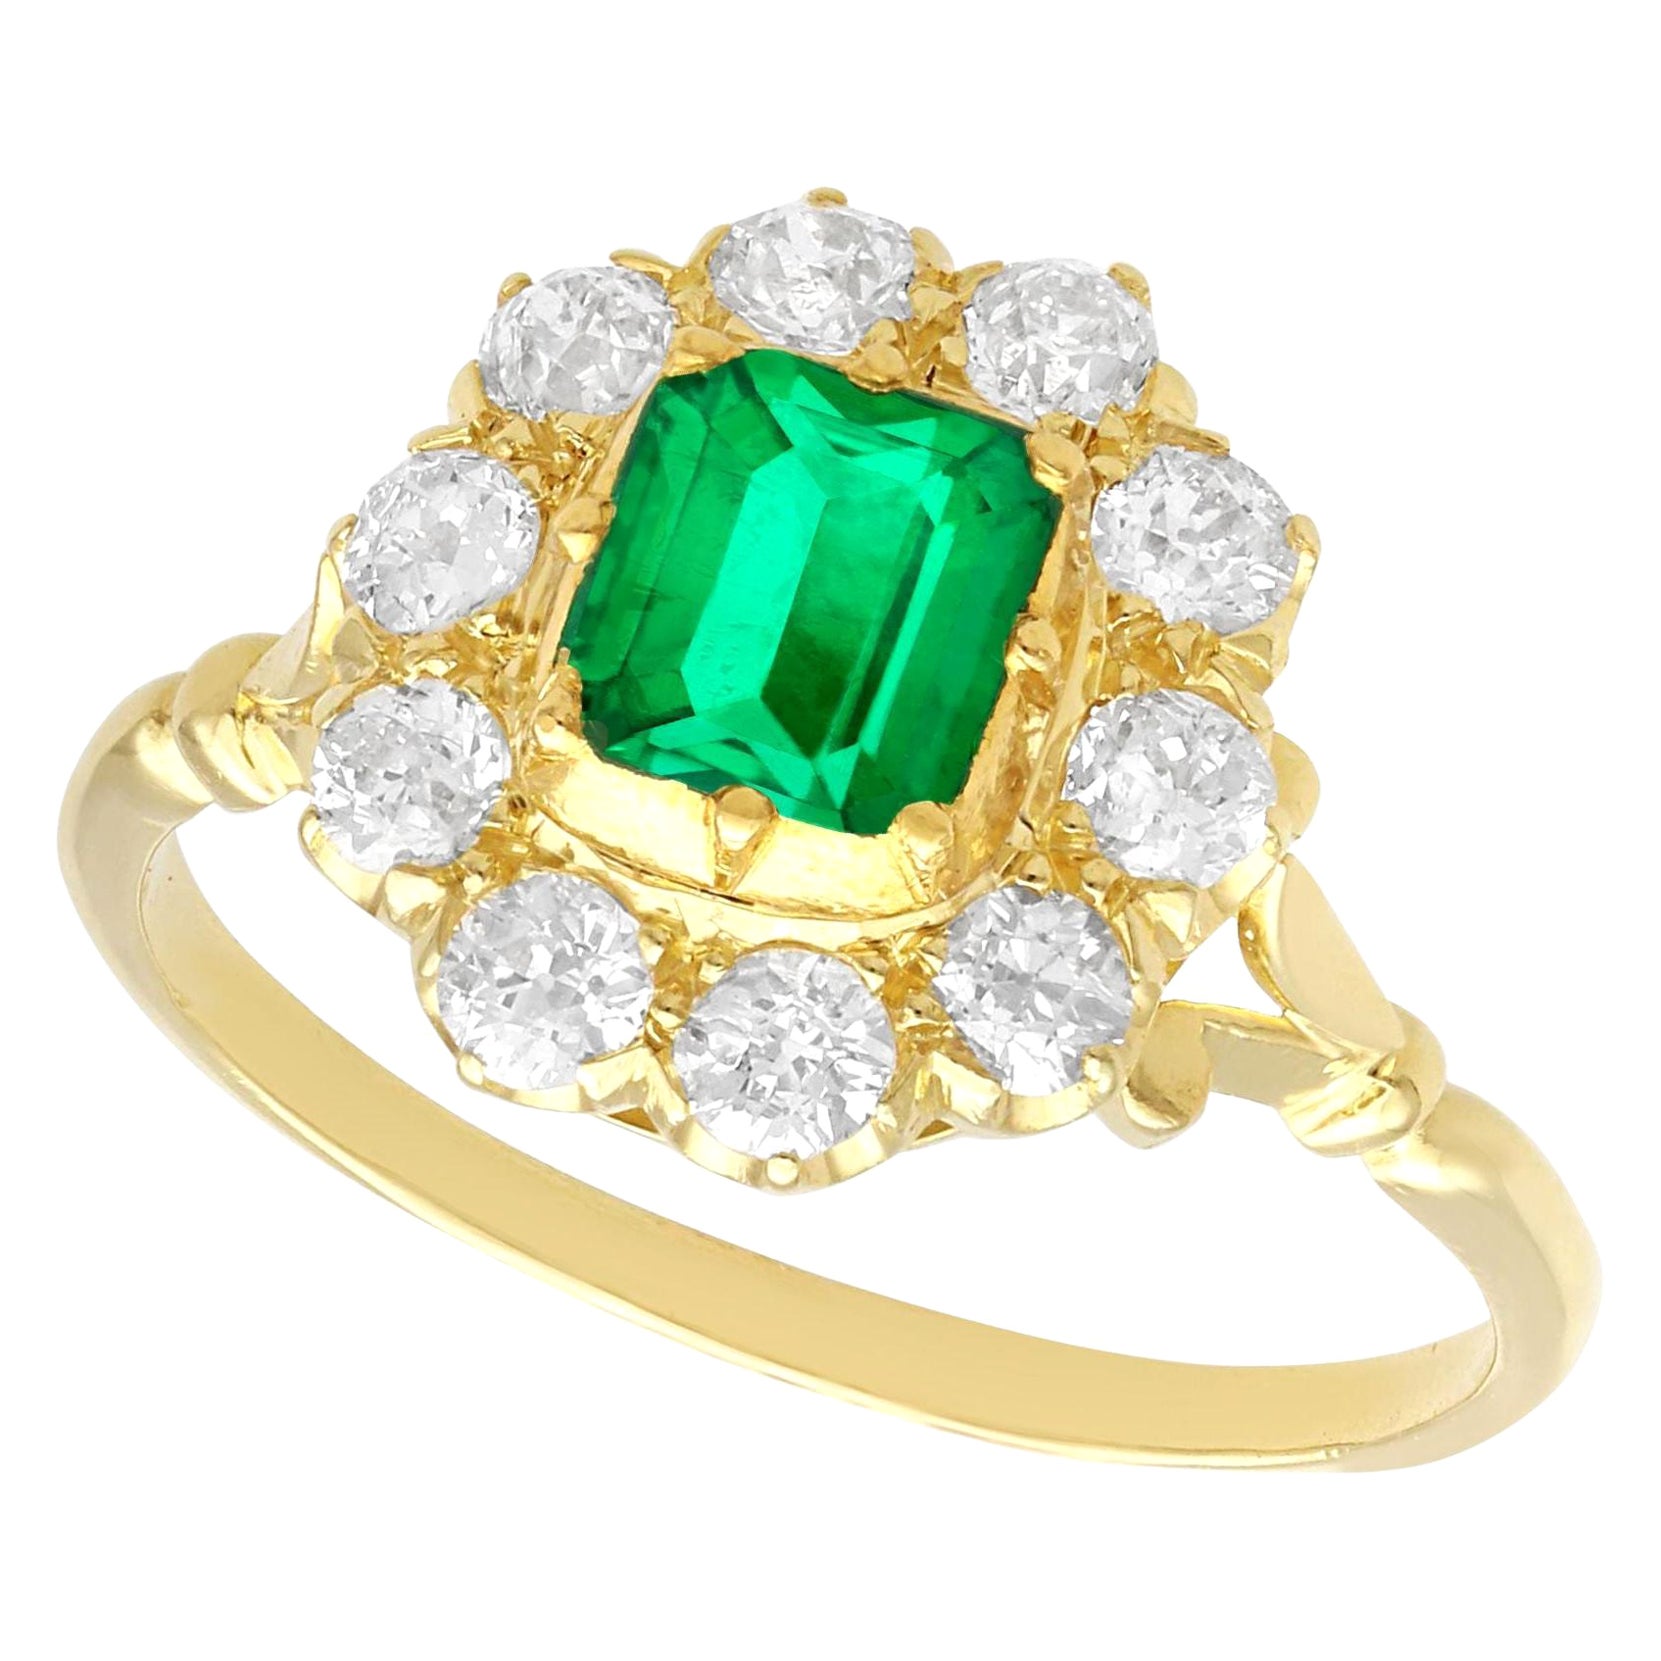 Vintage 0.82ct Emerald and 1.00ct Diamond, 18ct Yellow Gold Dress Ring